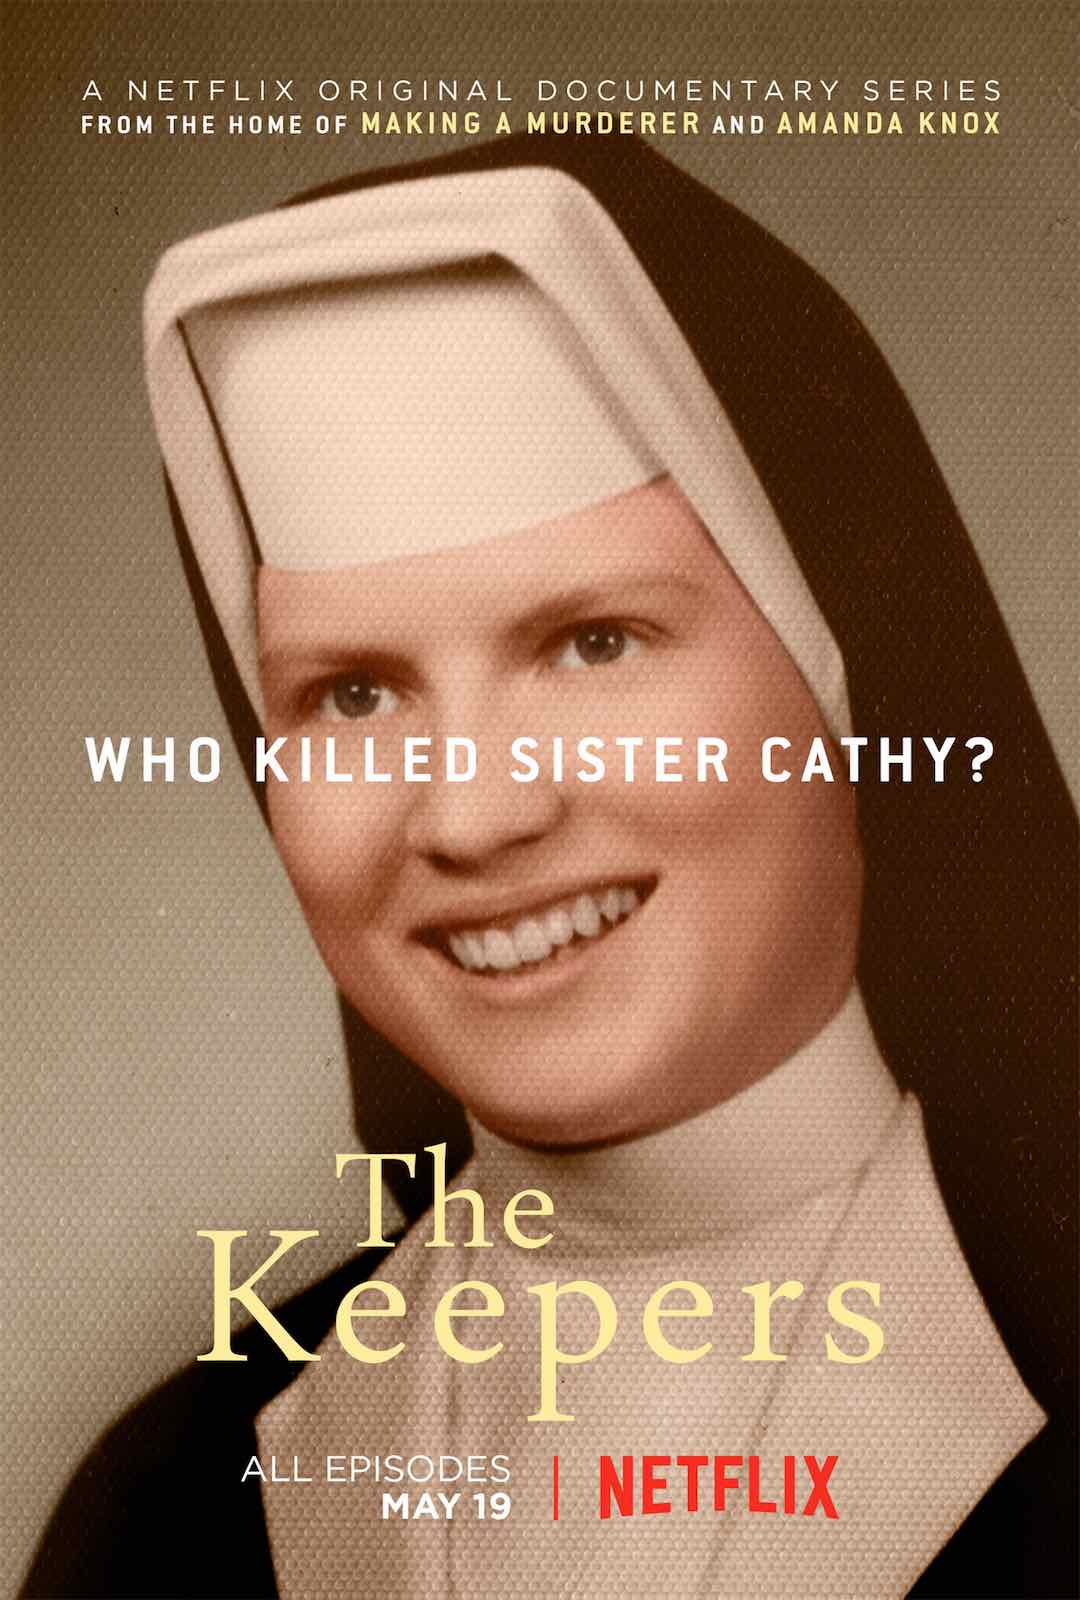 When your Netflix queue runs dry, 'The Keepers' and other content may provide you just the true crime to bingewatch next.